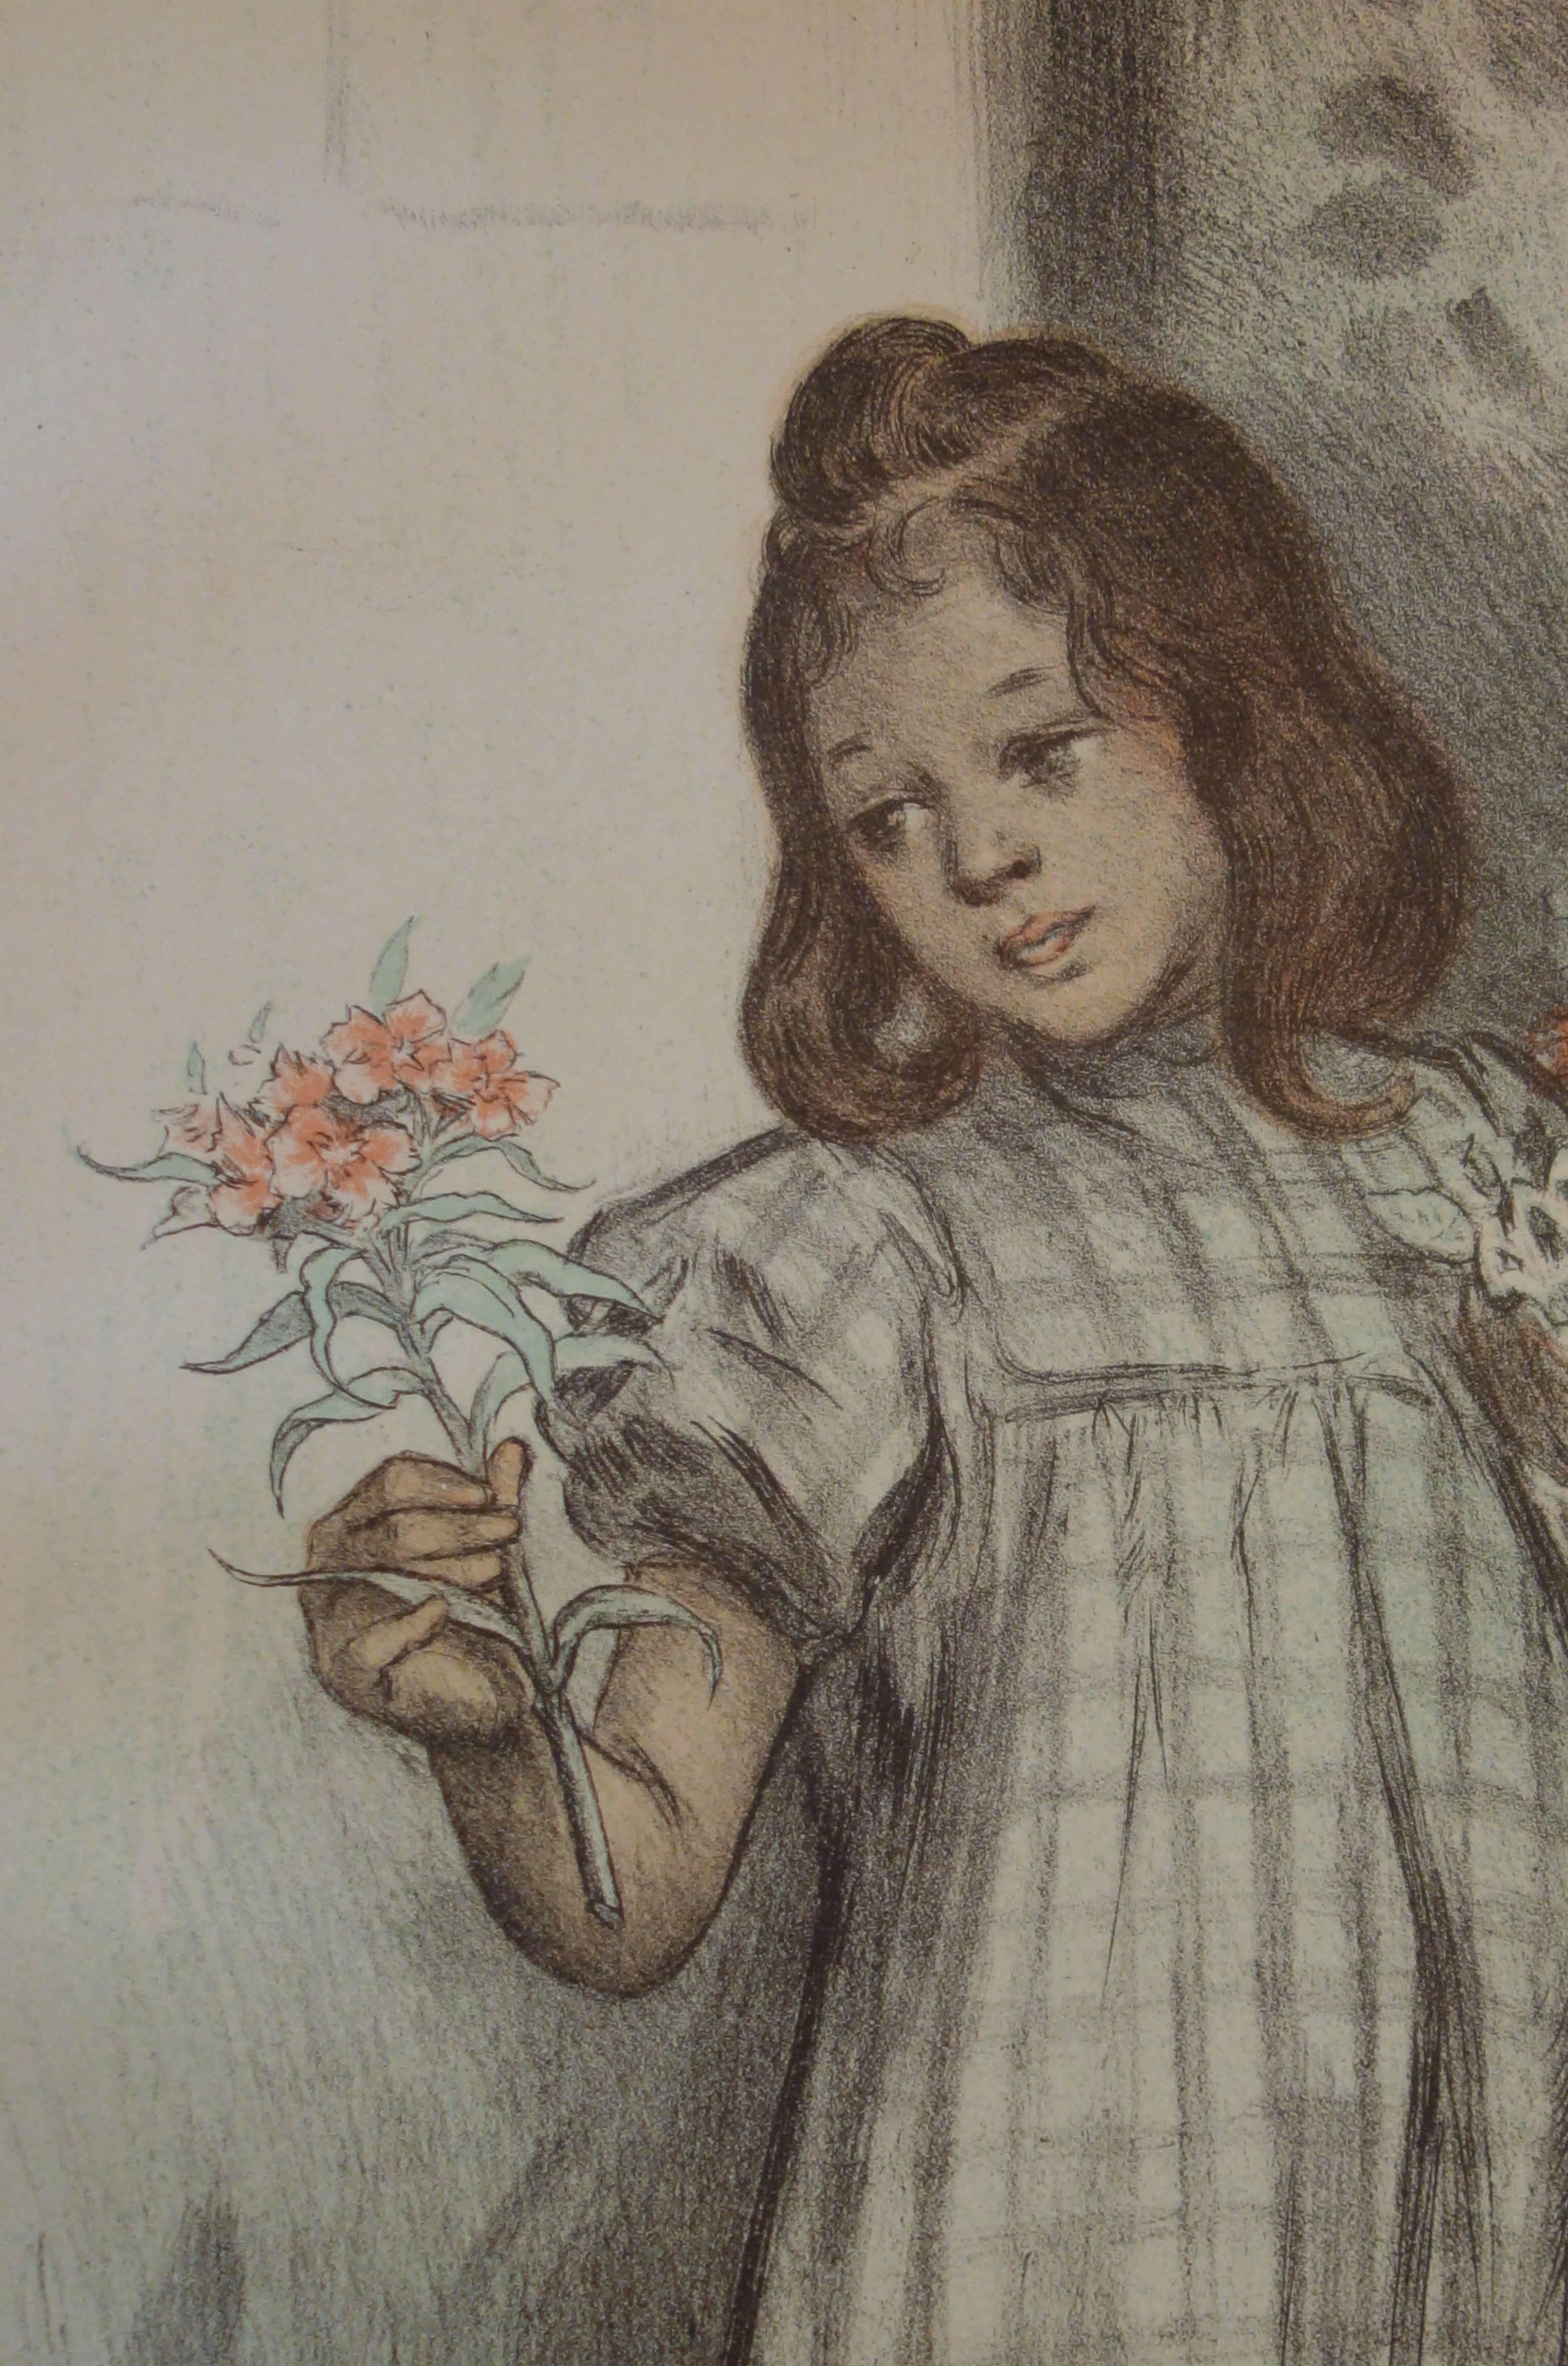 Young Girl with Flowers - Original lithograph - 1897 - Art Nouveau Print by Firmin Bouisset